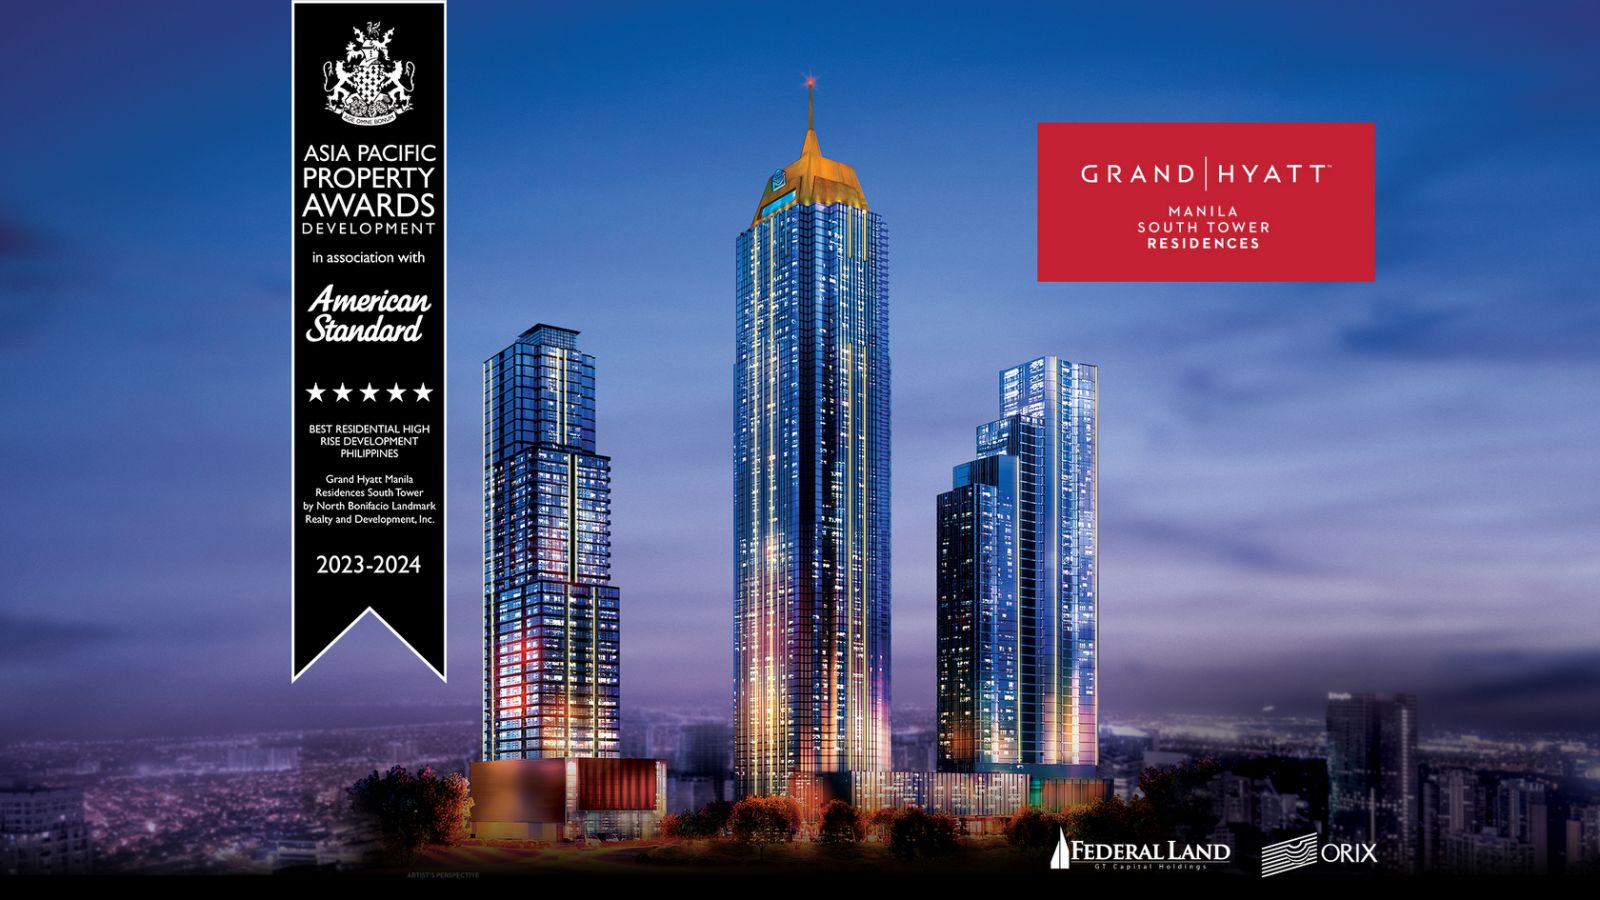 Grand Hyatt Manila Residences South Tower recognized as Philippines